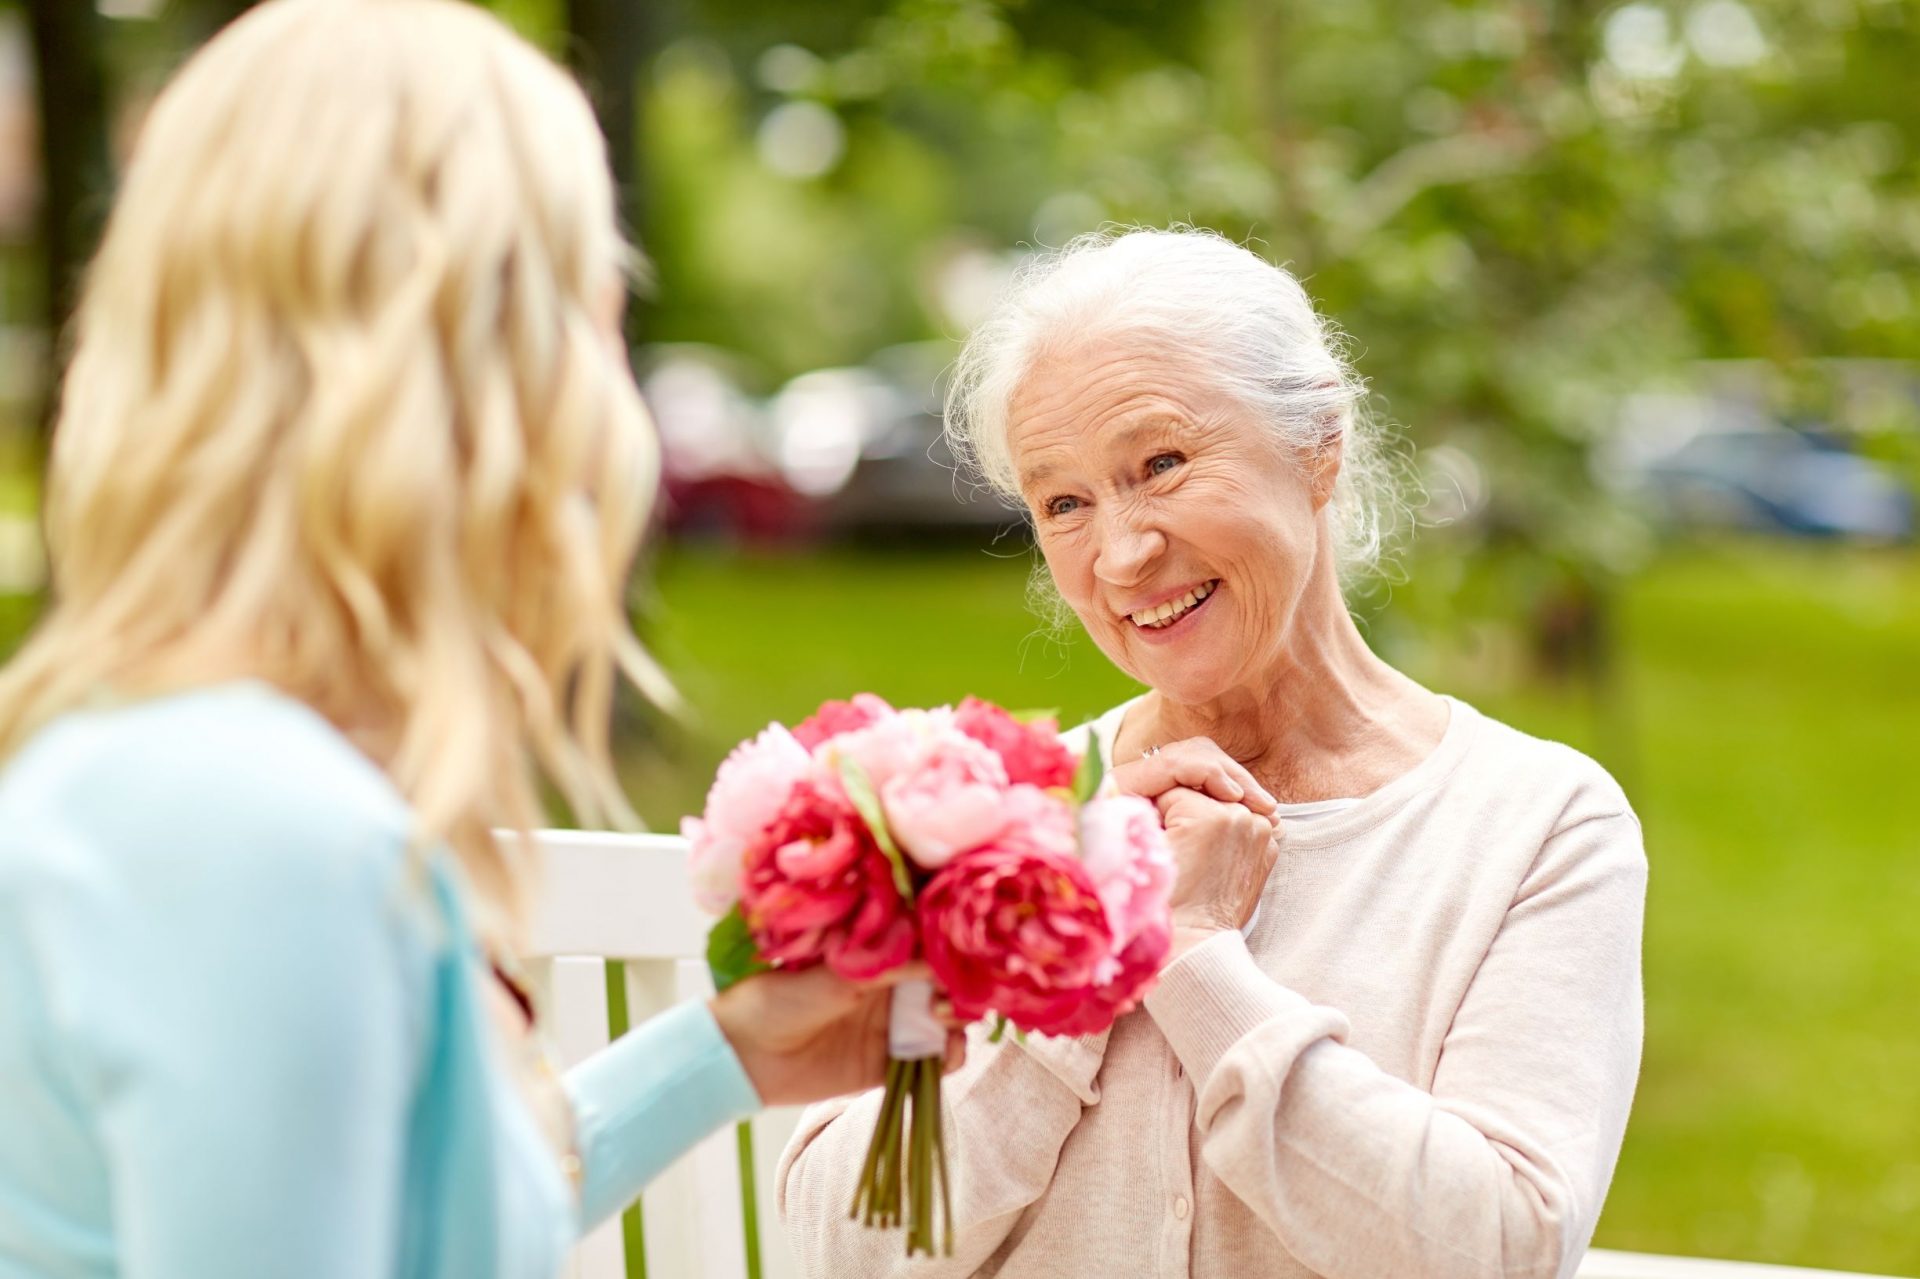 Elderly woman on a bench, smiling as younger woman hands her a bouquet of flowers outdoors.